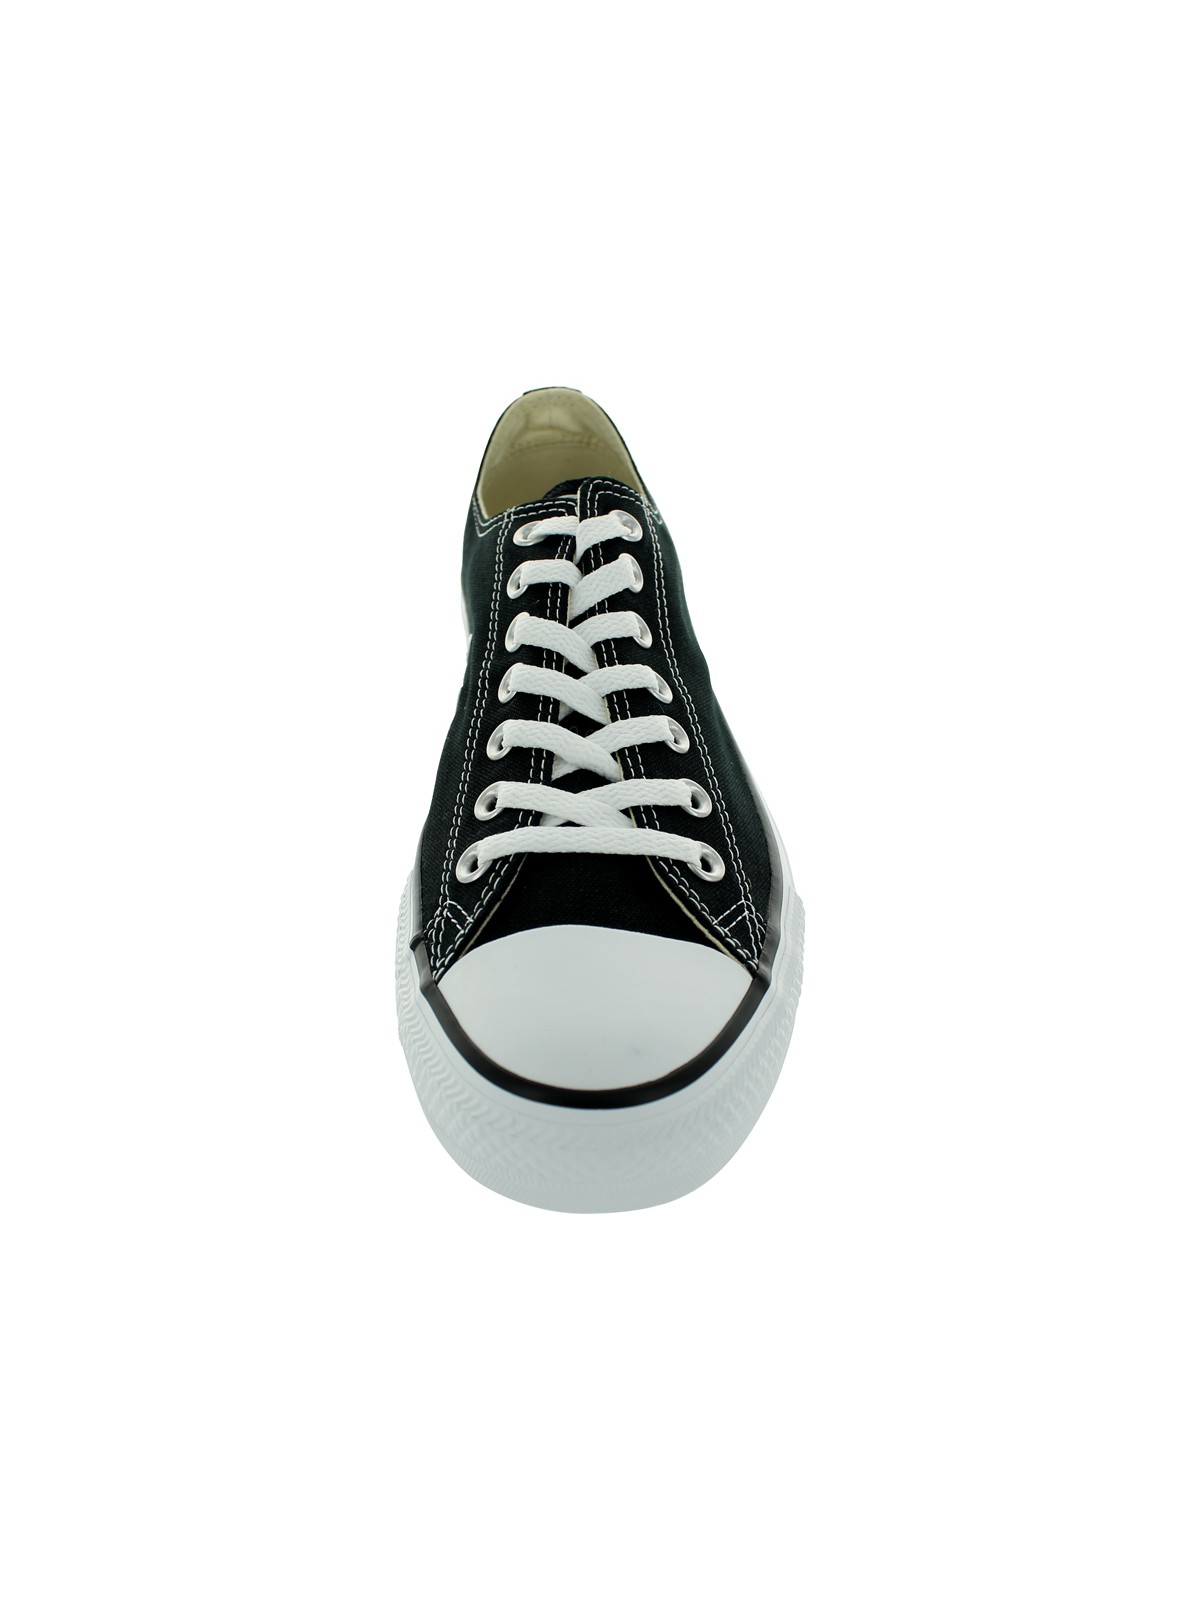 Converse Chuck Taylor All Star Low Top (International Version) Sneaker - image 3 of 5